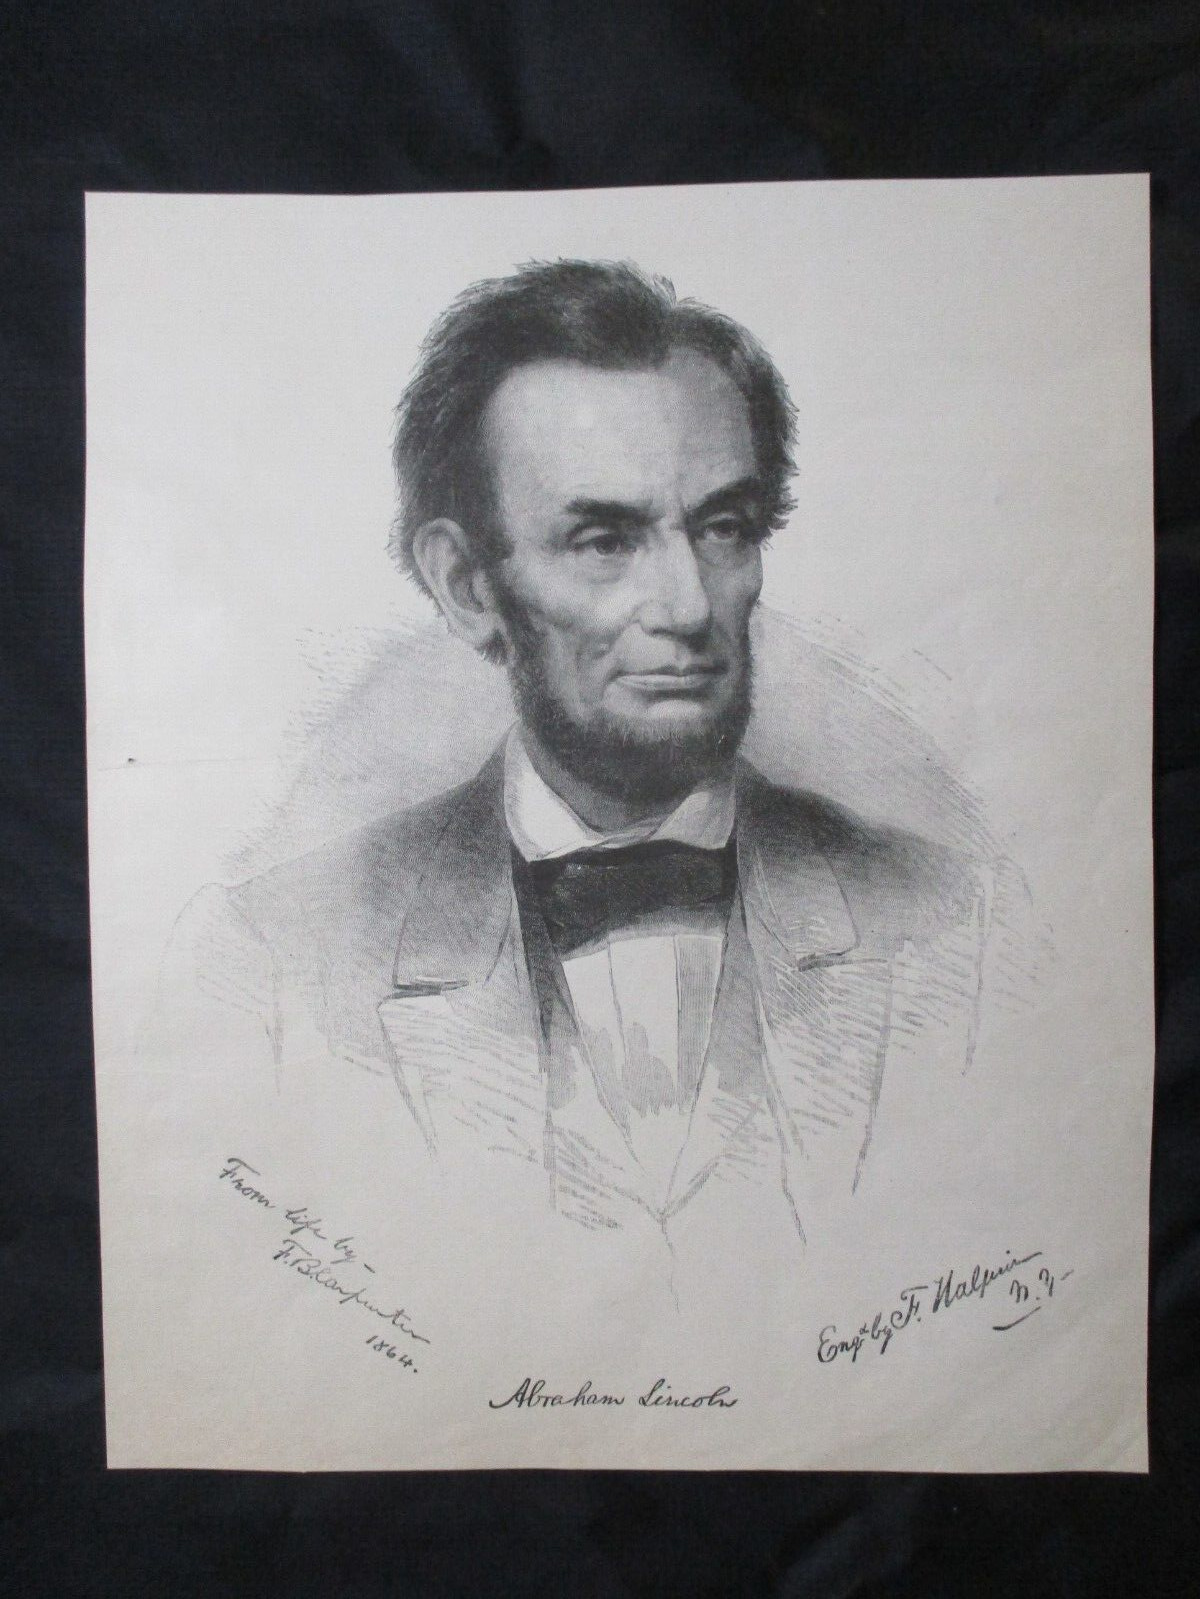 1884 Civil War Print - President Abraham Lincoln - SEE ALL MY LINCOLN AUCTIONS